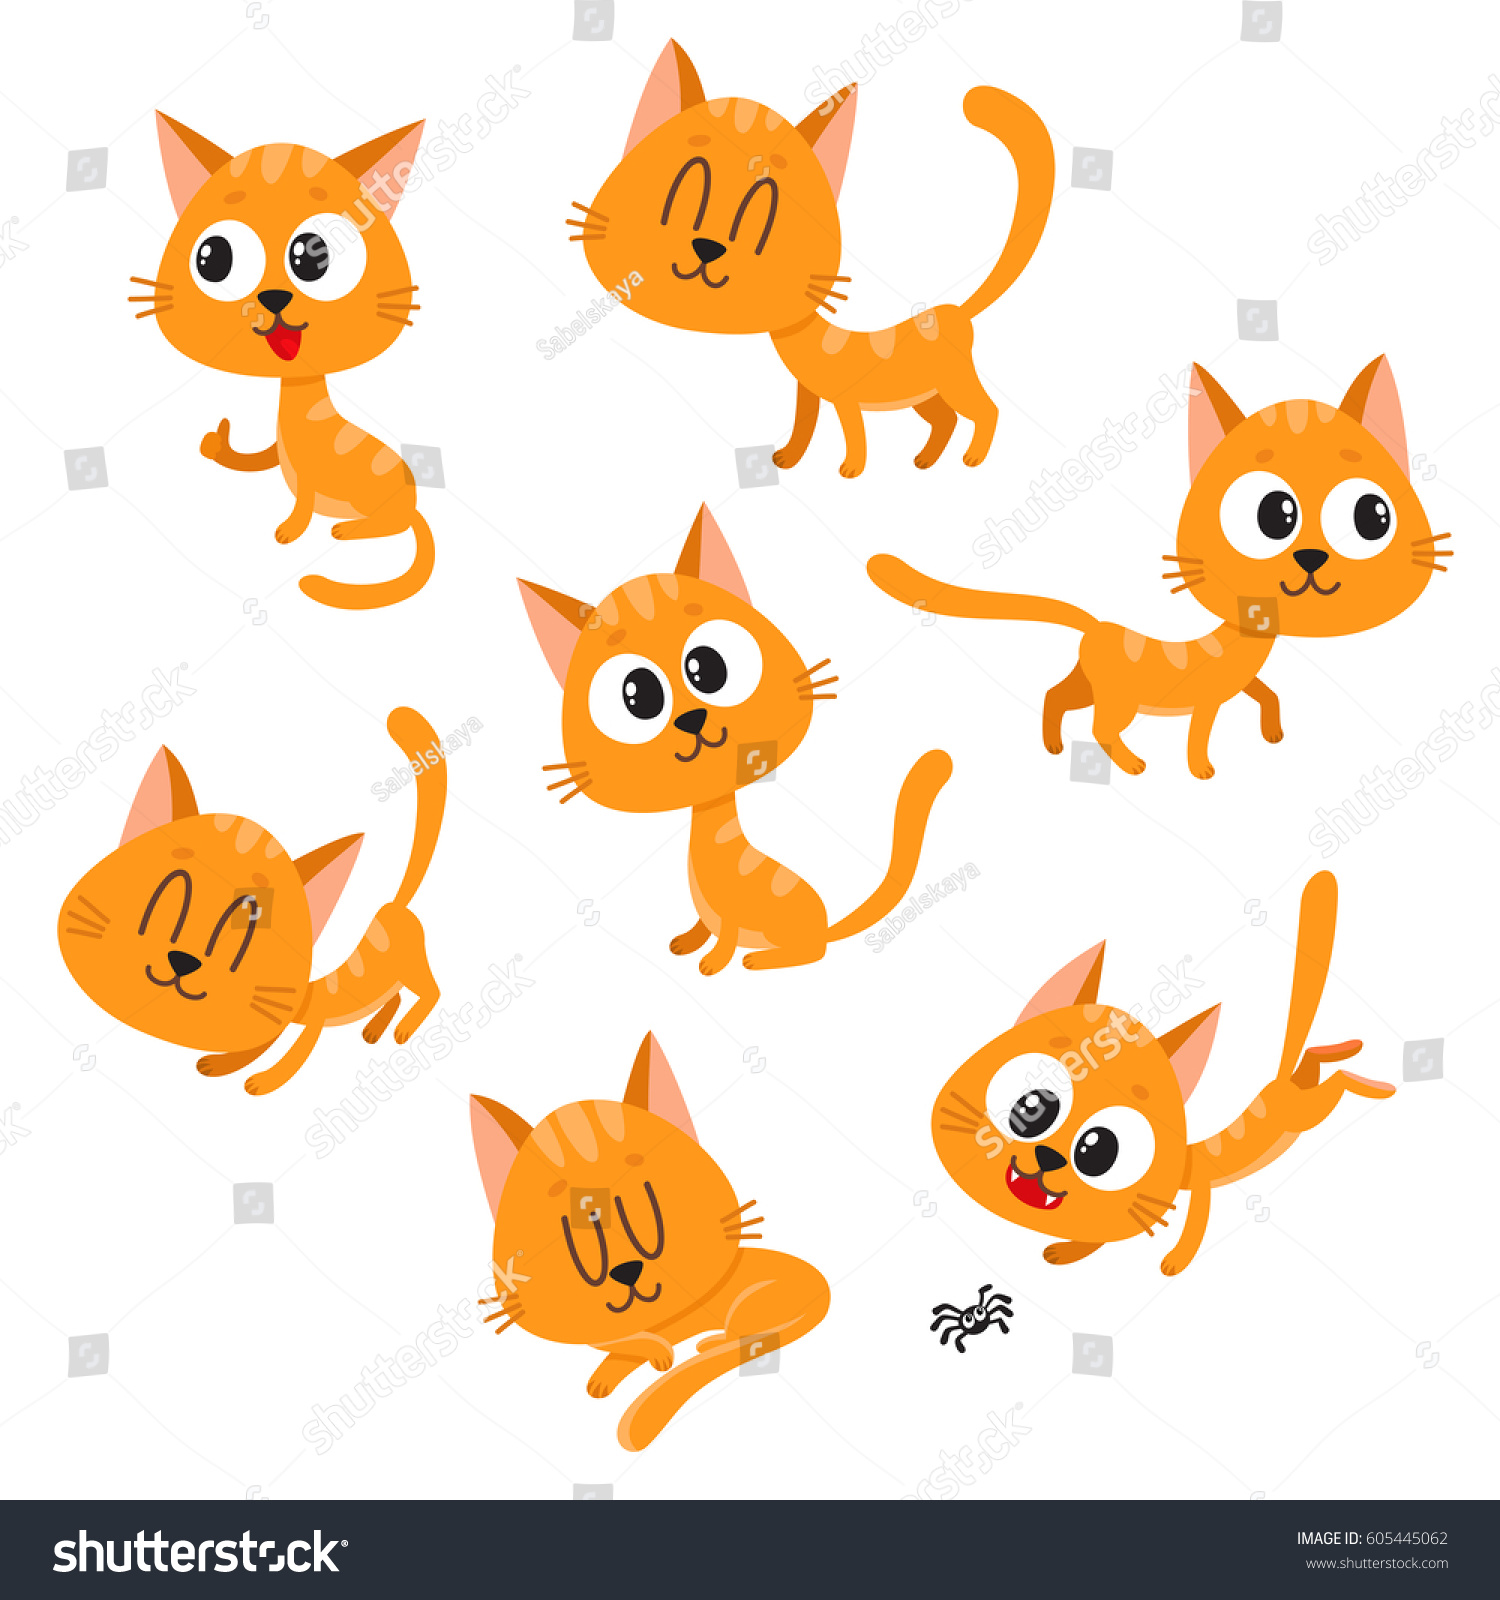 Set Cute Funny Orange Cat Character Stock Vector Royalty Free Shutterstock